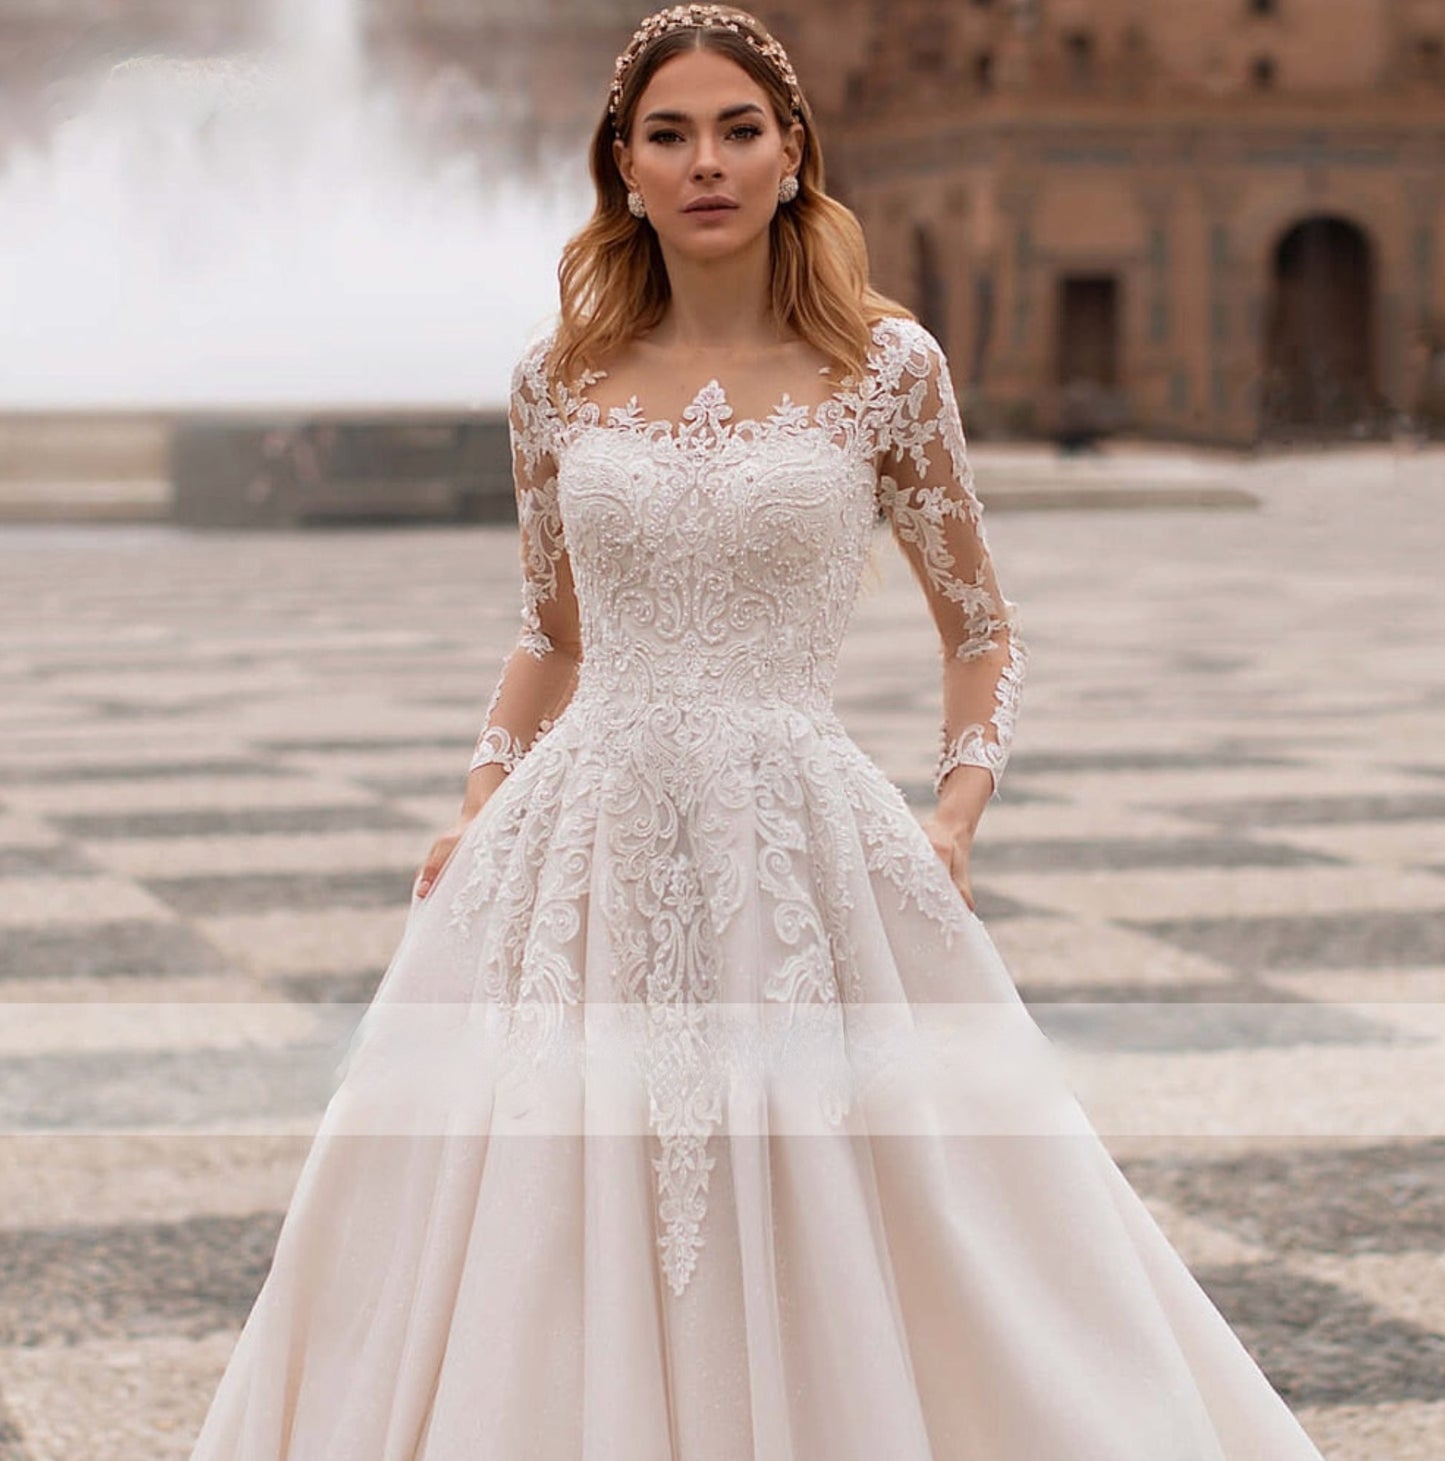 Gold Lace Beaded V-Neck Long Sleeves Ball Gown Wedding Dresses with Chapel  Train, MW154 – Musebridals